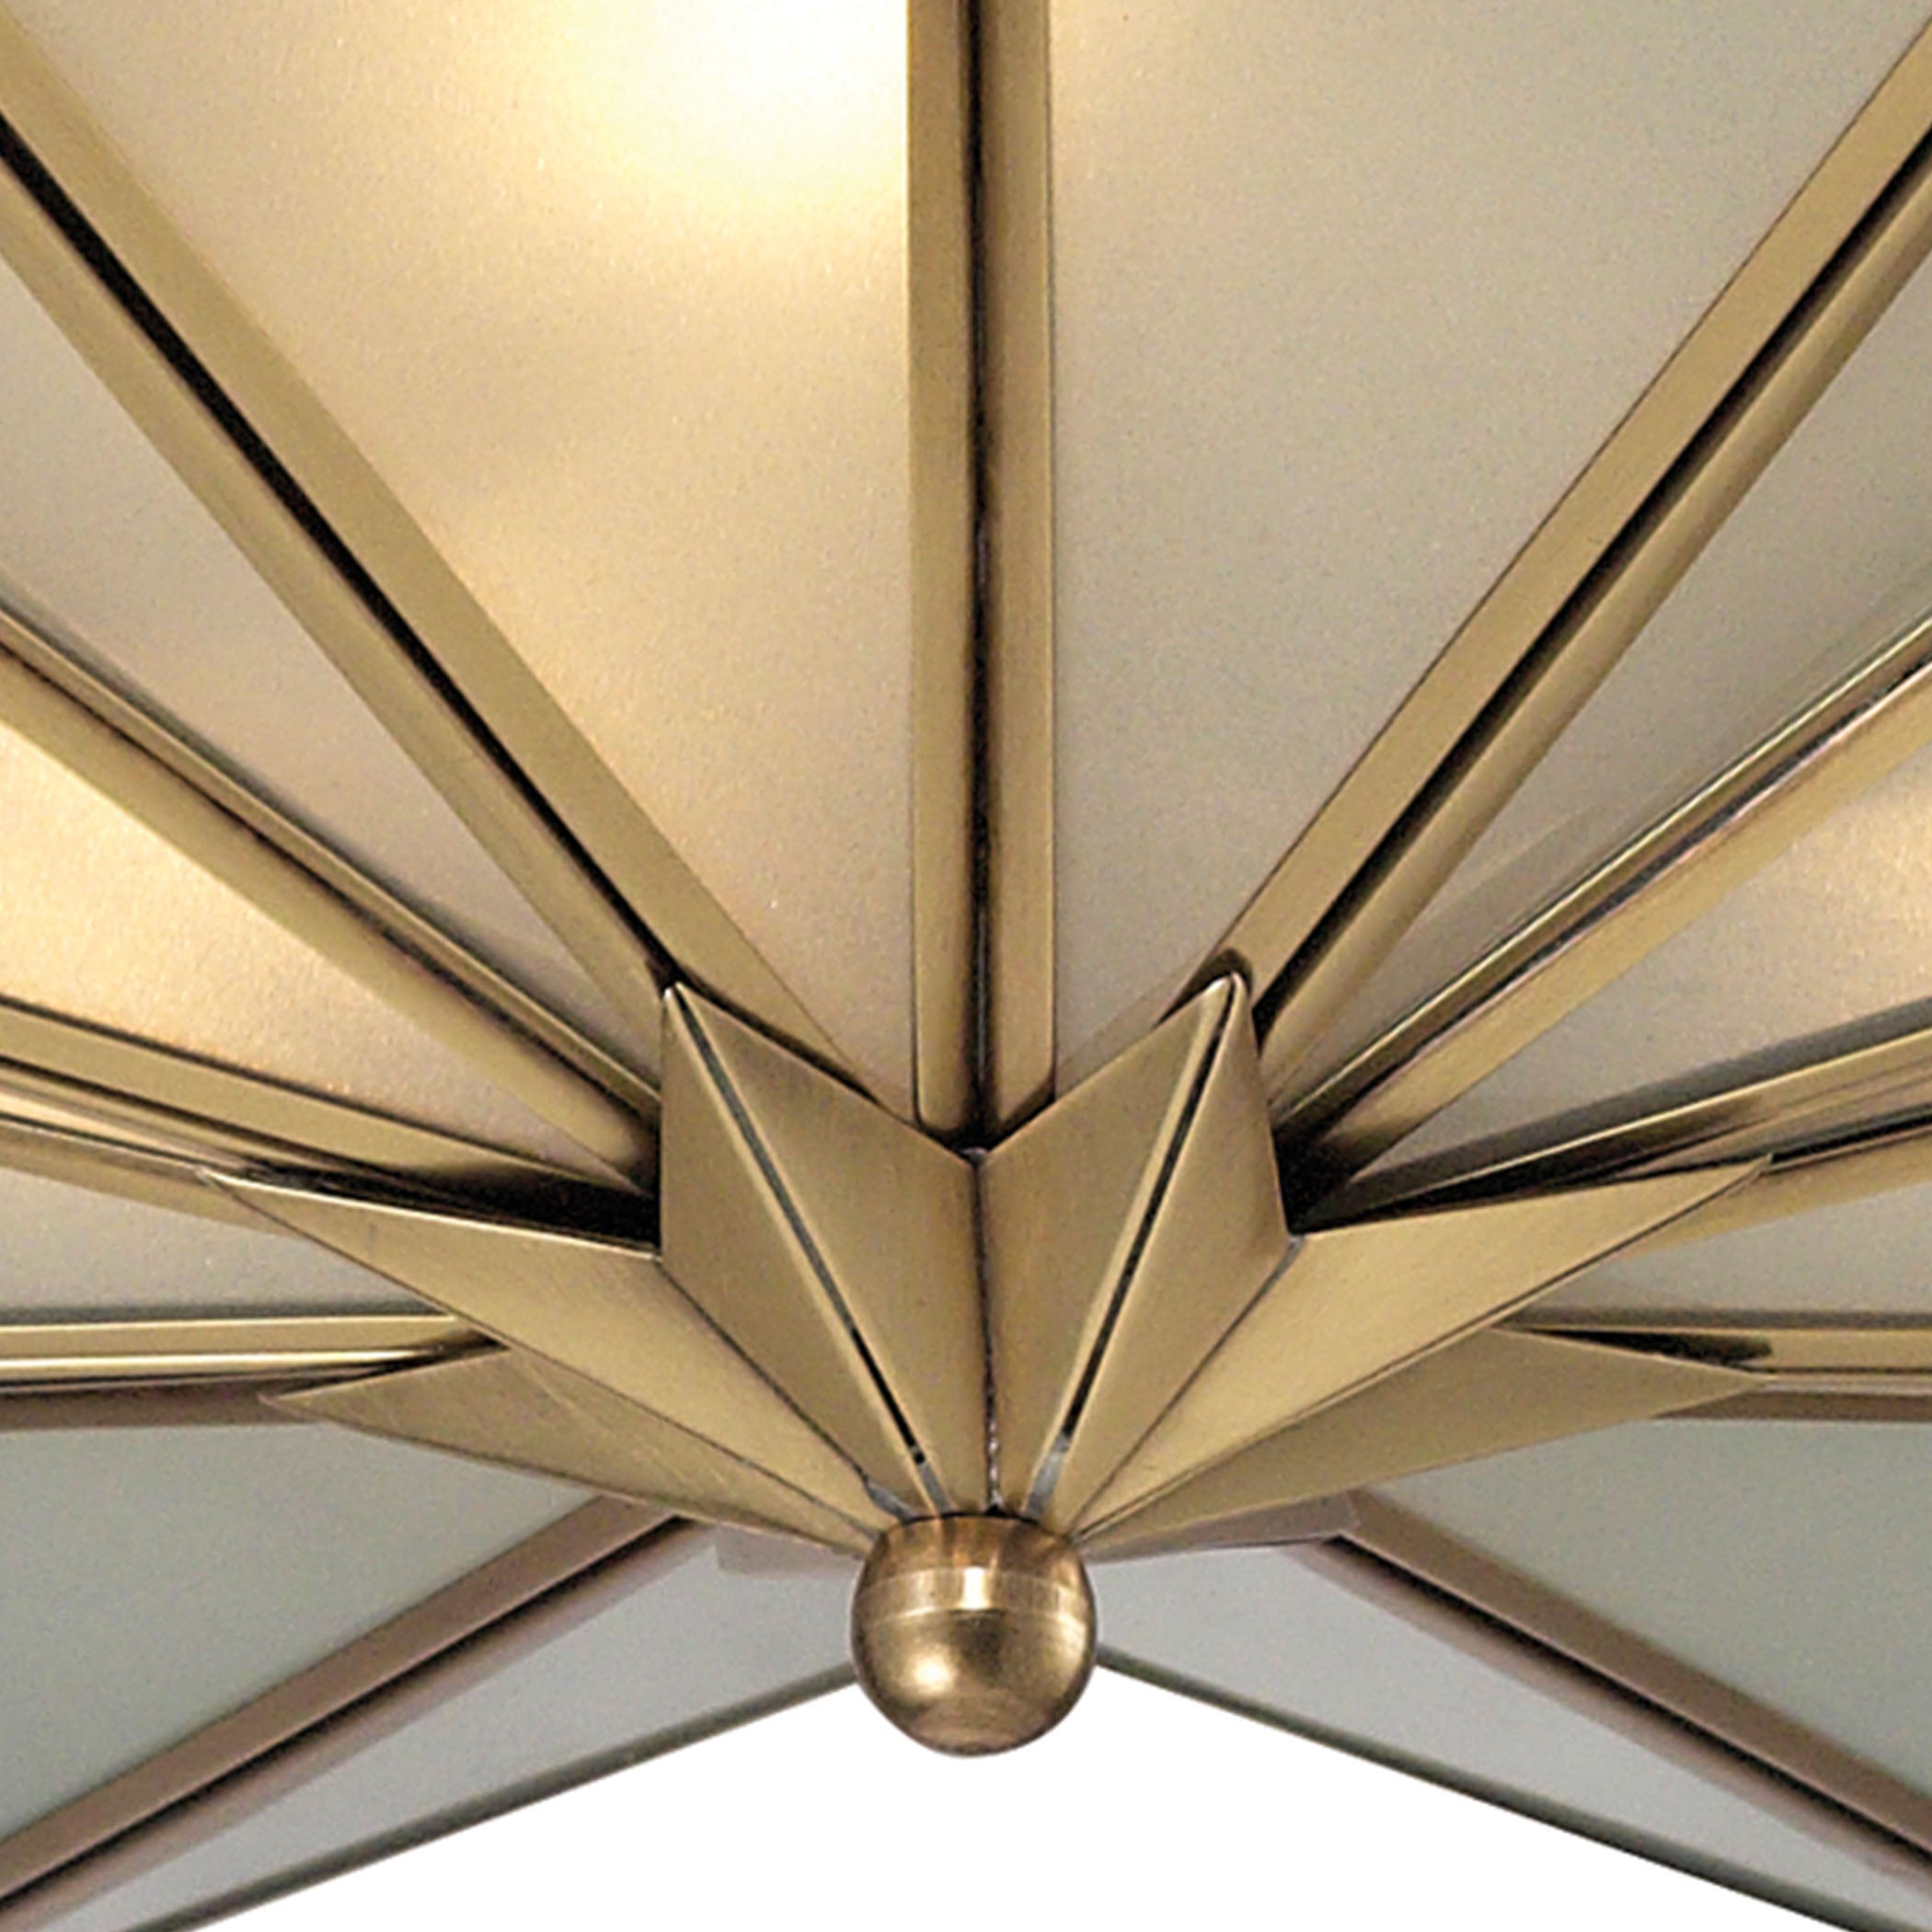 ELK Lighting 22011/3 Decostar 3-Light Flush Mount in Brushed Brass with Frosted Glass Panels